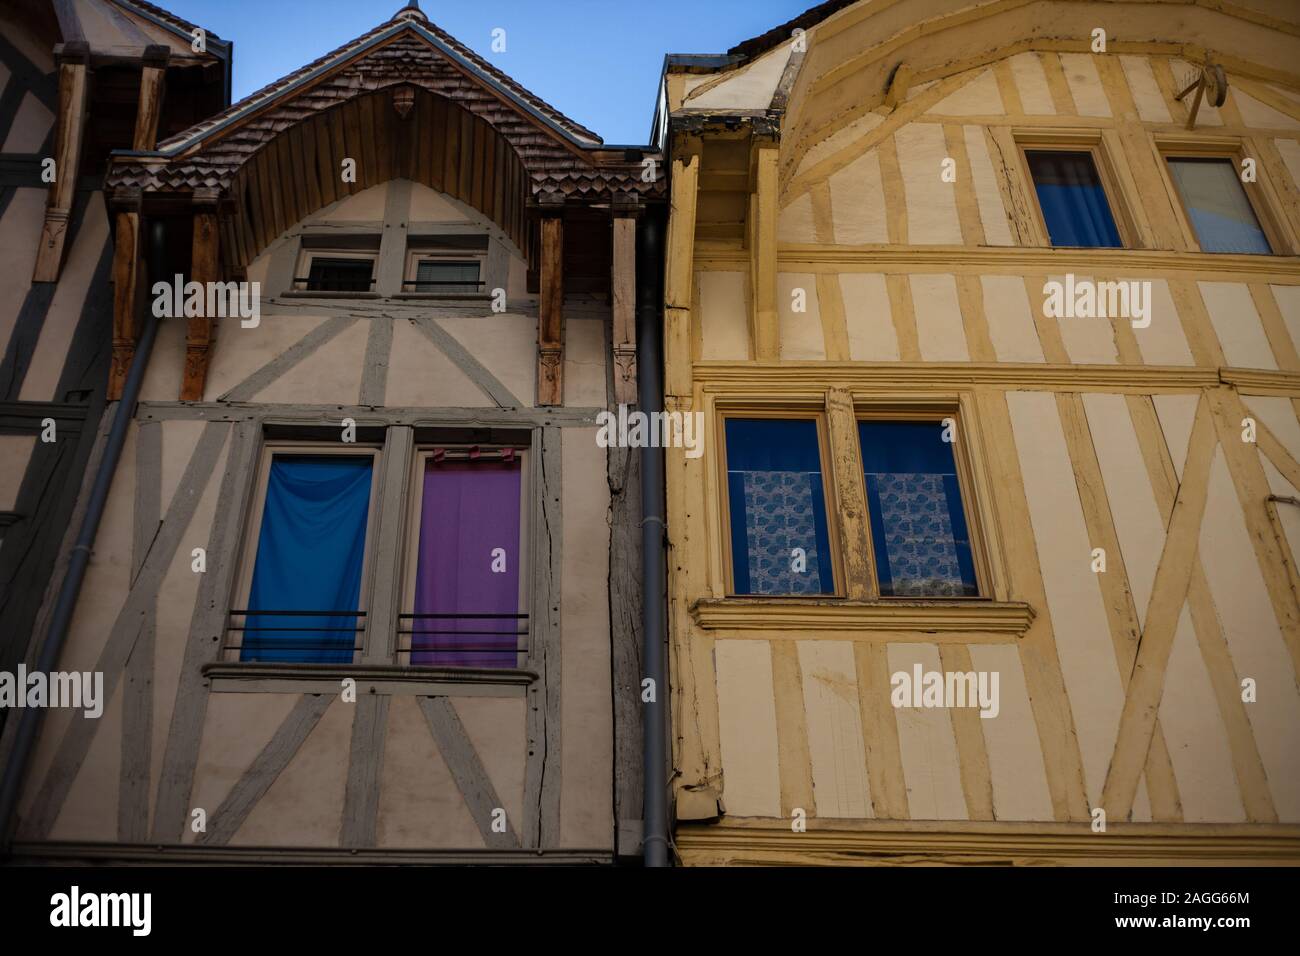 Troyes France, Campaign region medieval architecture, Details Stock Photo